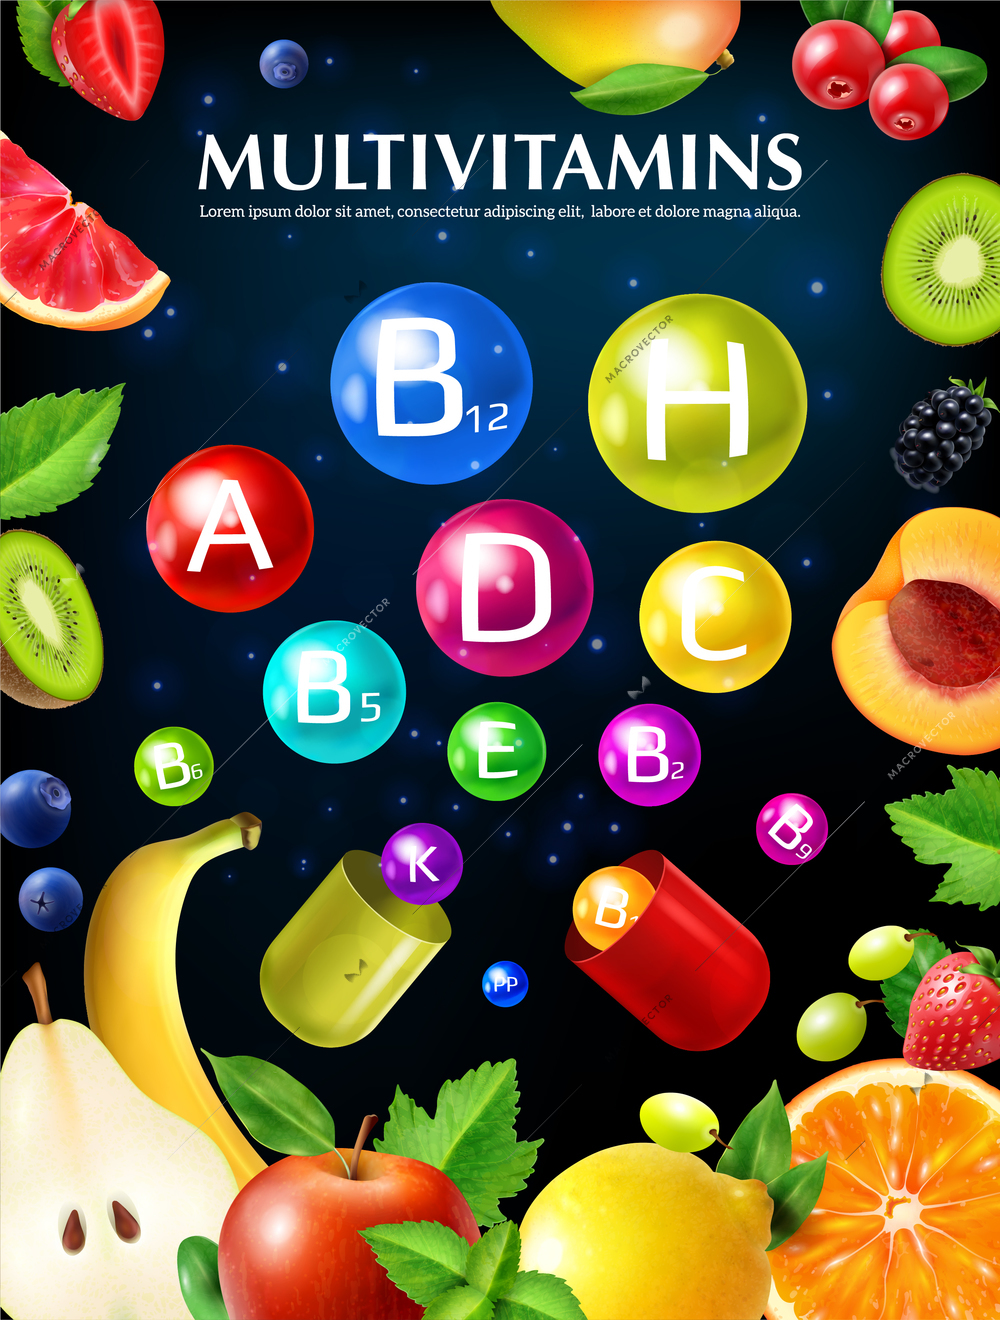 Best vitamins minerals boosting energy 3d colorful realistic advertising poster with fruits extracts supplements multivitamins vector illustration